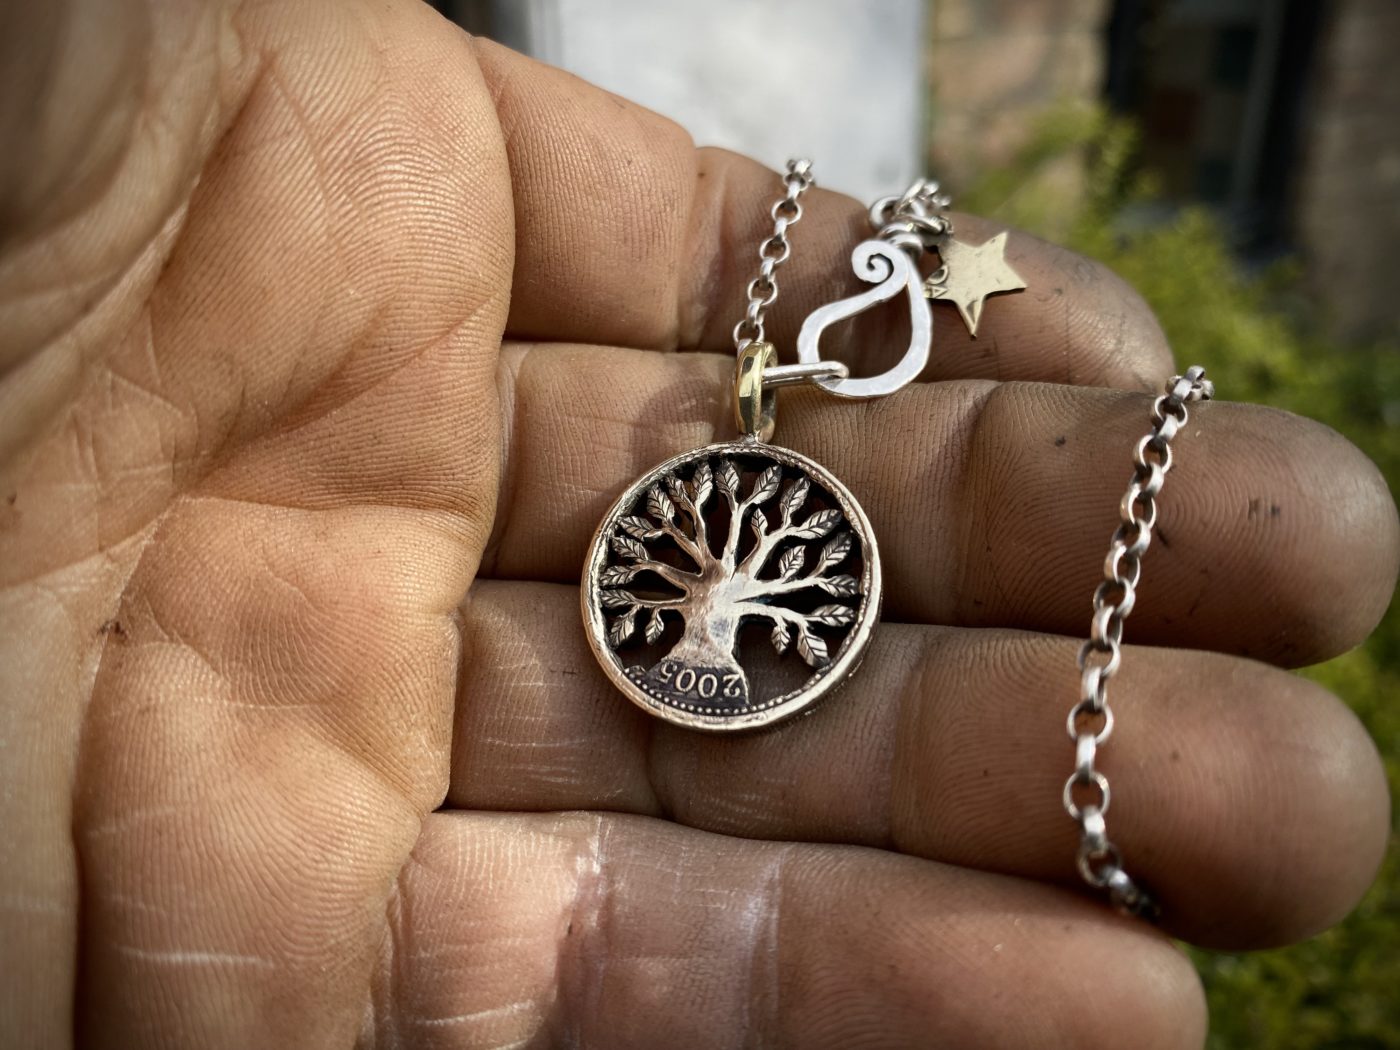 18th birthday gift idea handmade and ethically recycled tree of life necklace pendant made in England from a upcycled pound coin 2005